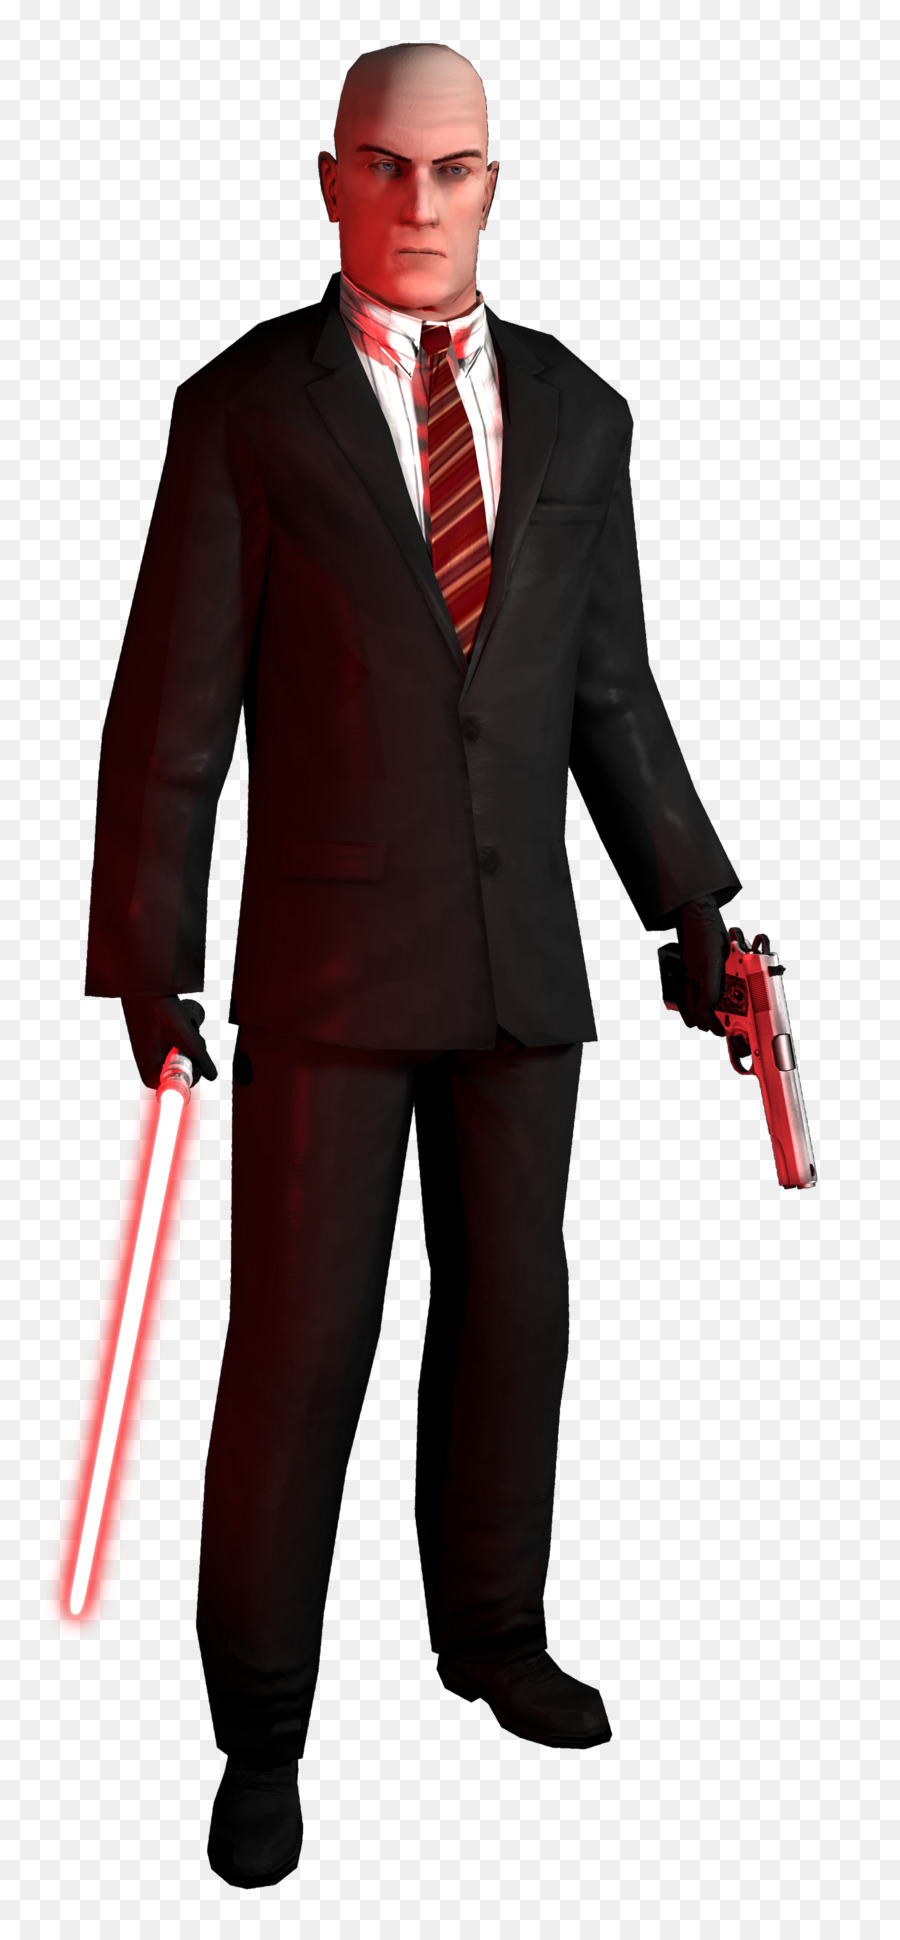 Hitman: Codename 47 Hitman: Absolution Agent 47 - Hitman Transparent Background png download - 1850*3950 - Free Transparent Hitman png Download.